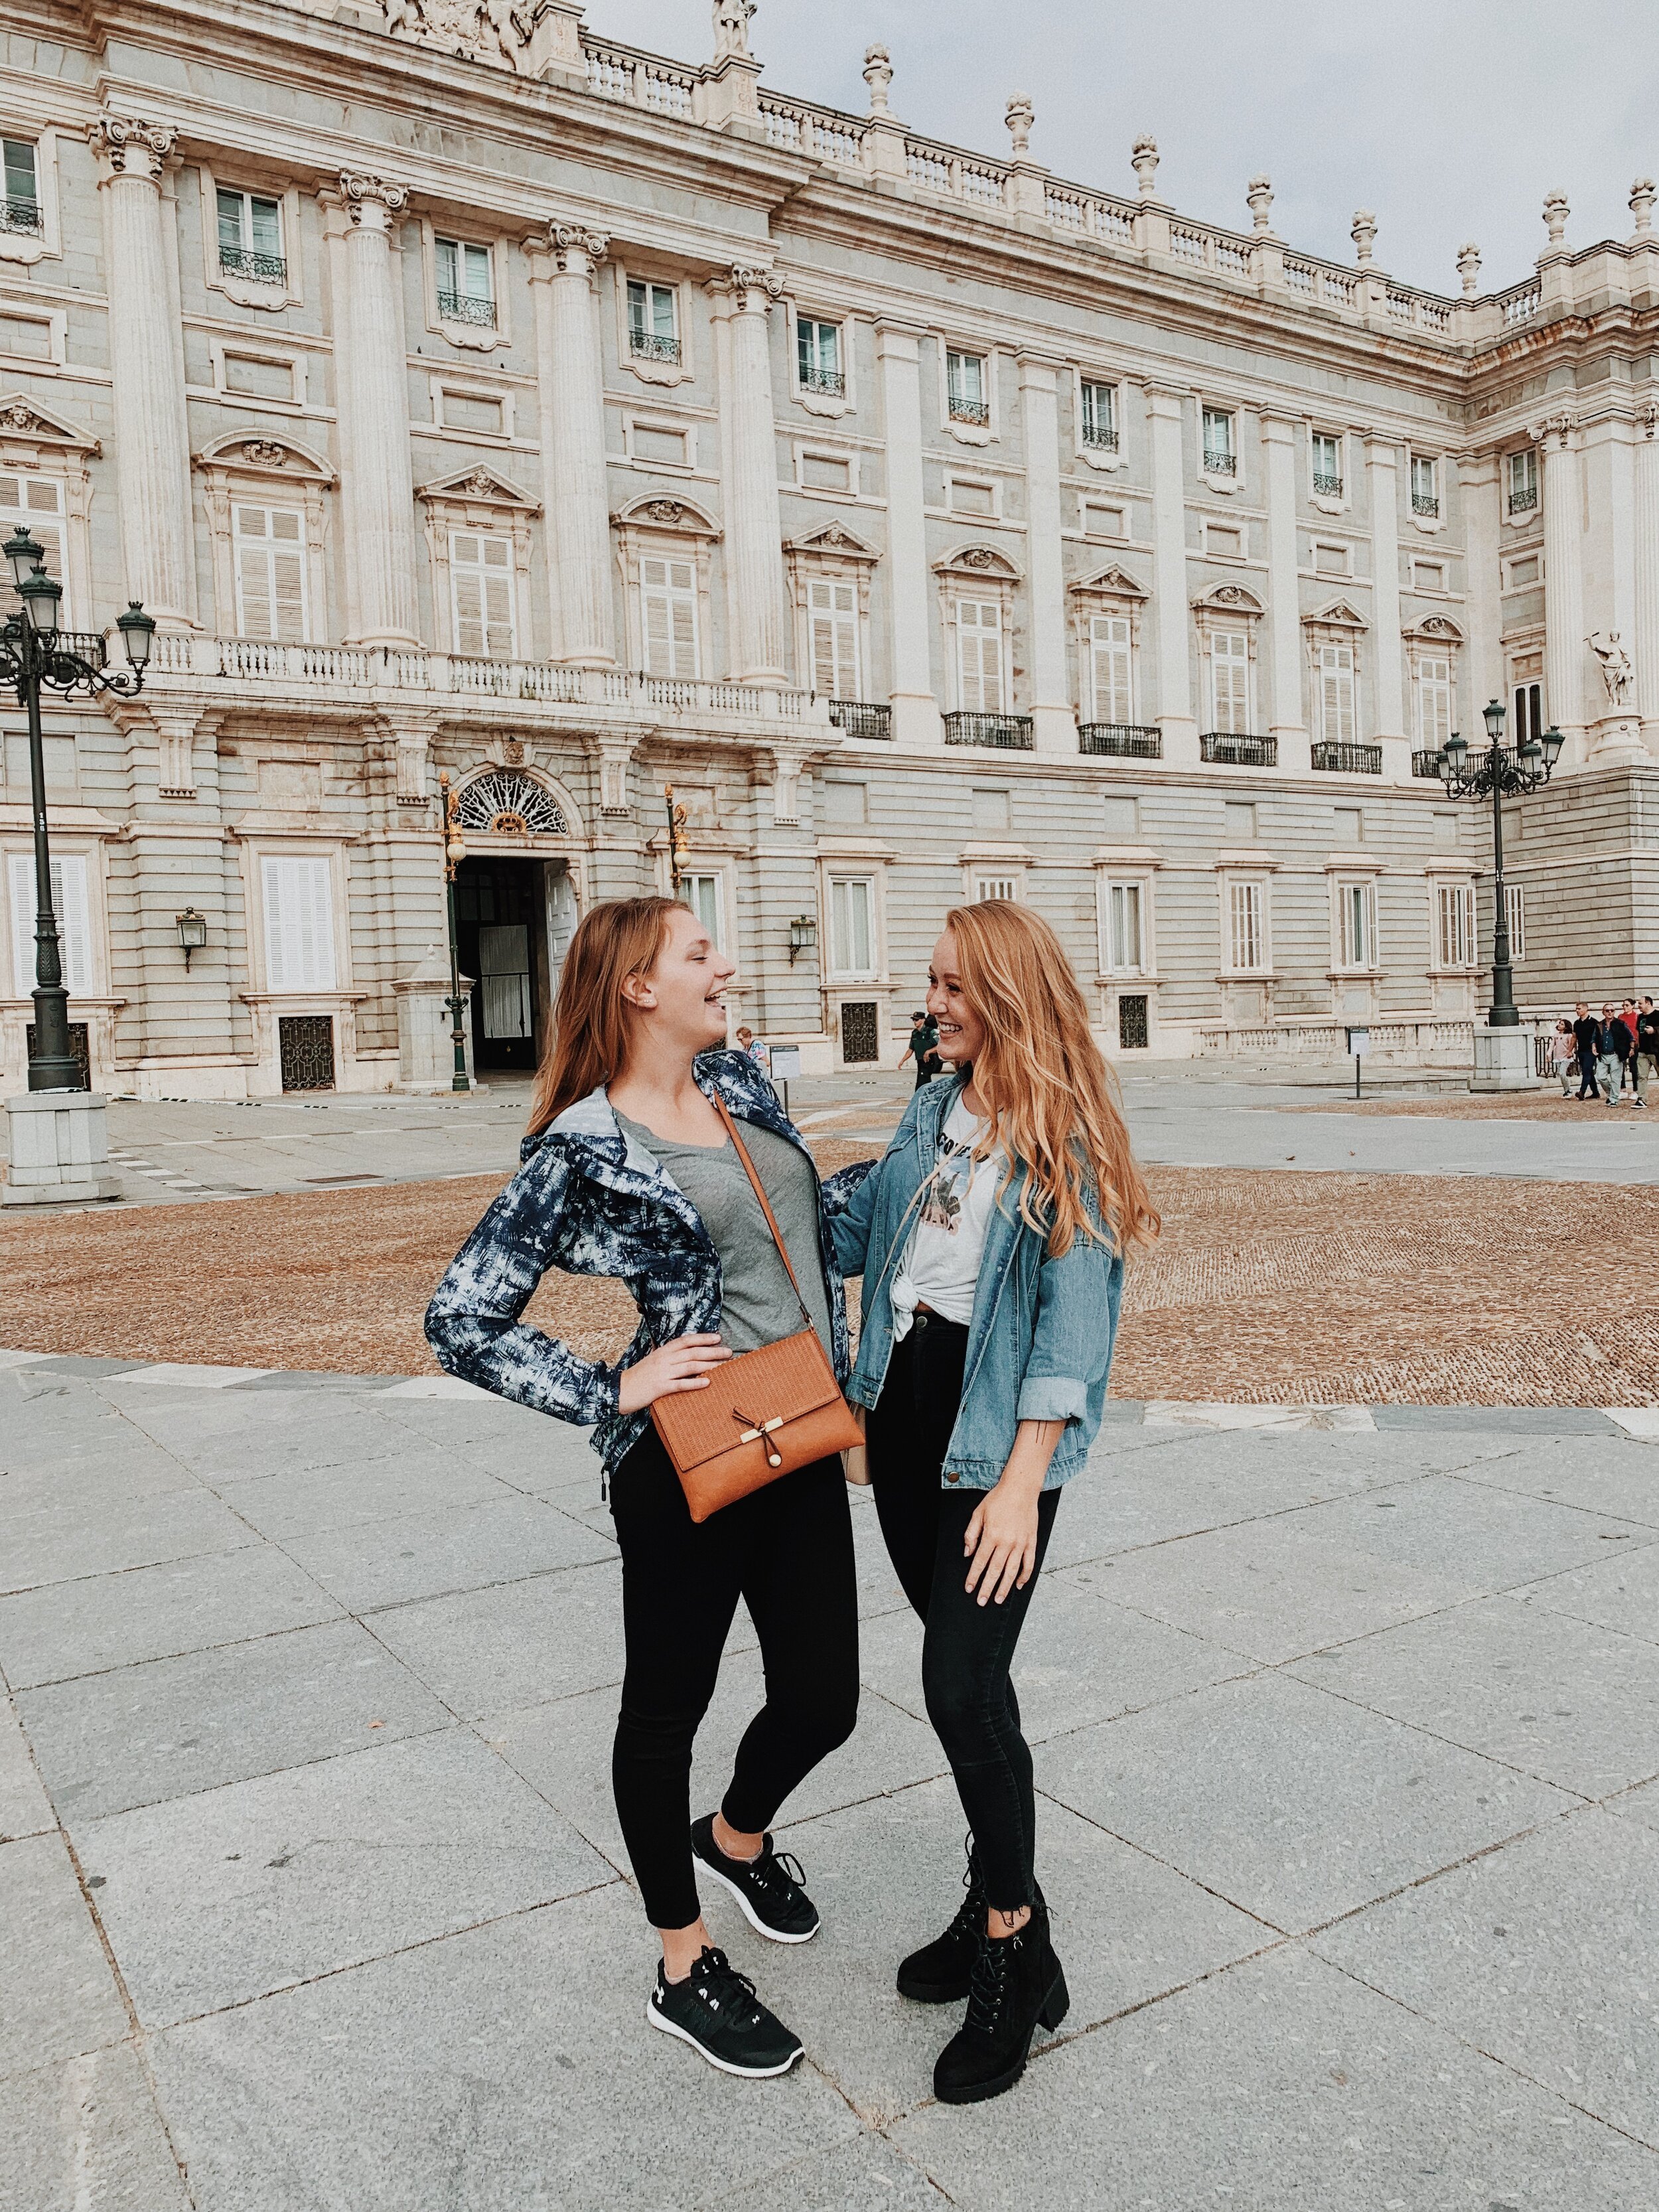 Should I study abroad? Why you need to study abroad and how it will change your life. 5 ways studying abroad will change your life. 